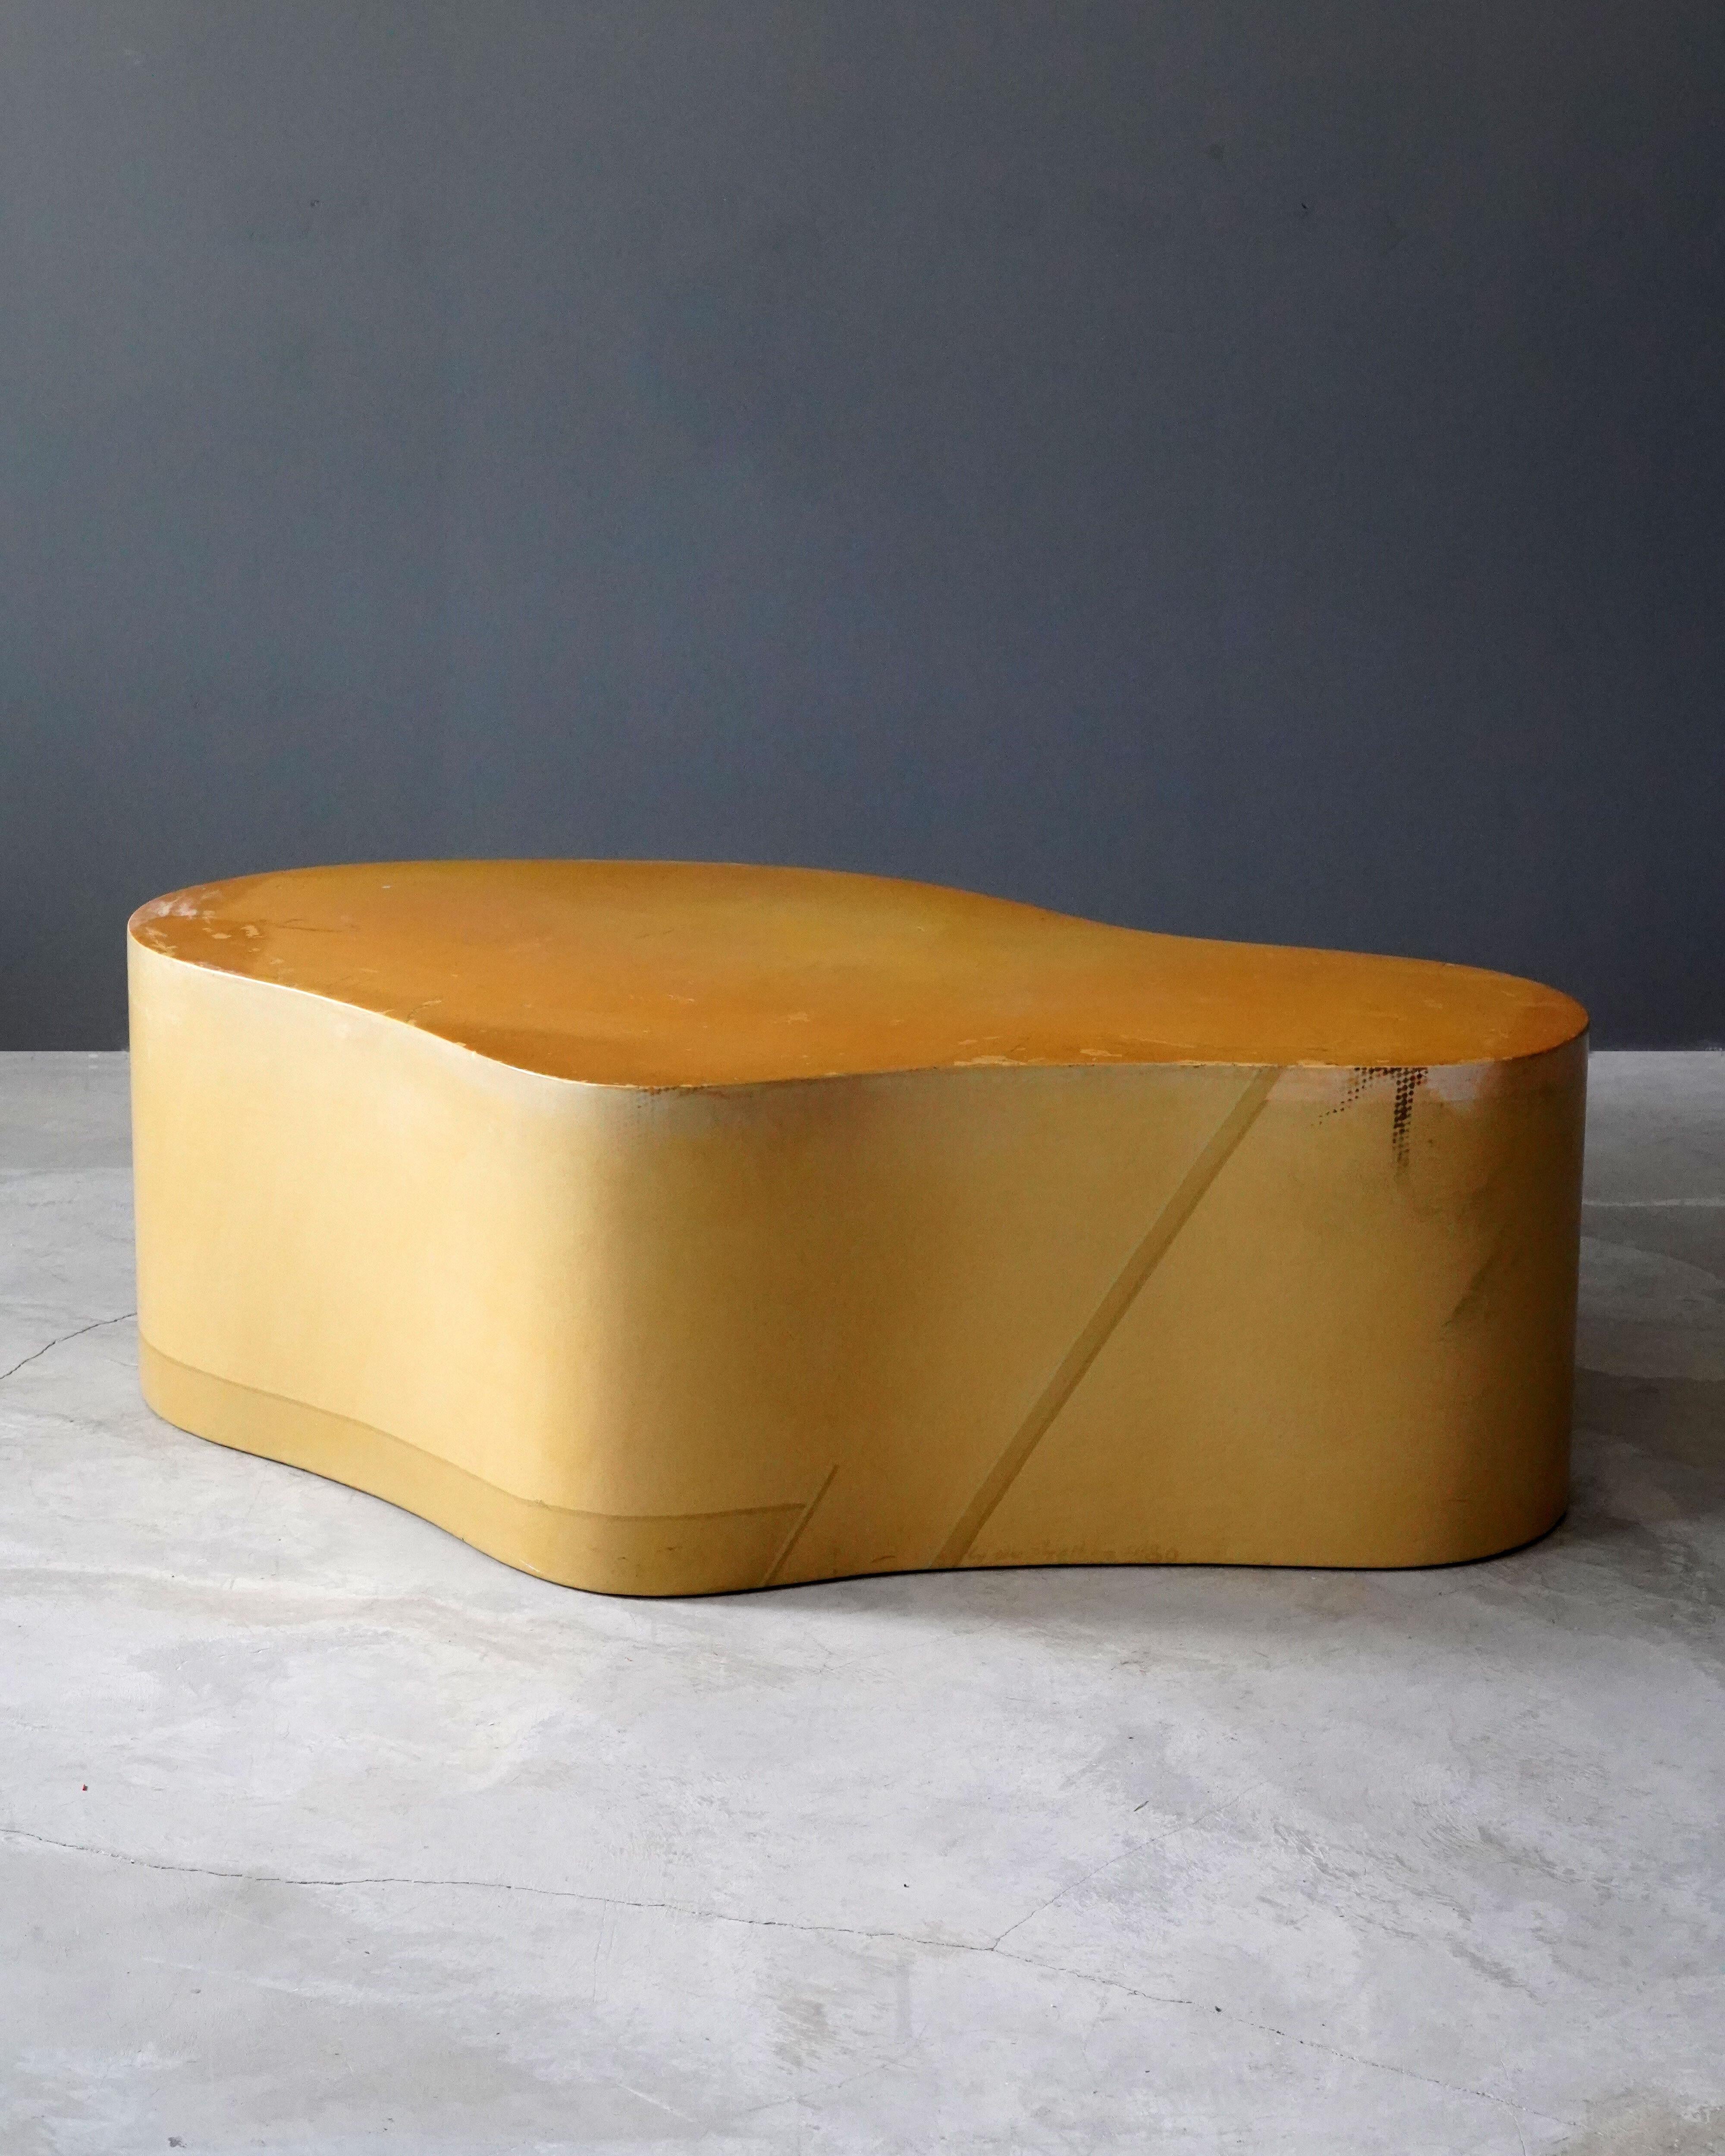 An organic / biomorphic coffee / cocktail table, designed and produced by Karl Springer, painted by Lynn Shelton in beige / yellow tones, c. 1980. Signed Lynn Shelton 11/80' along lower edge. Executed in painted paper over laminated plywood.


 